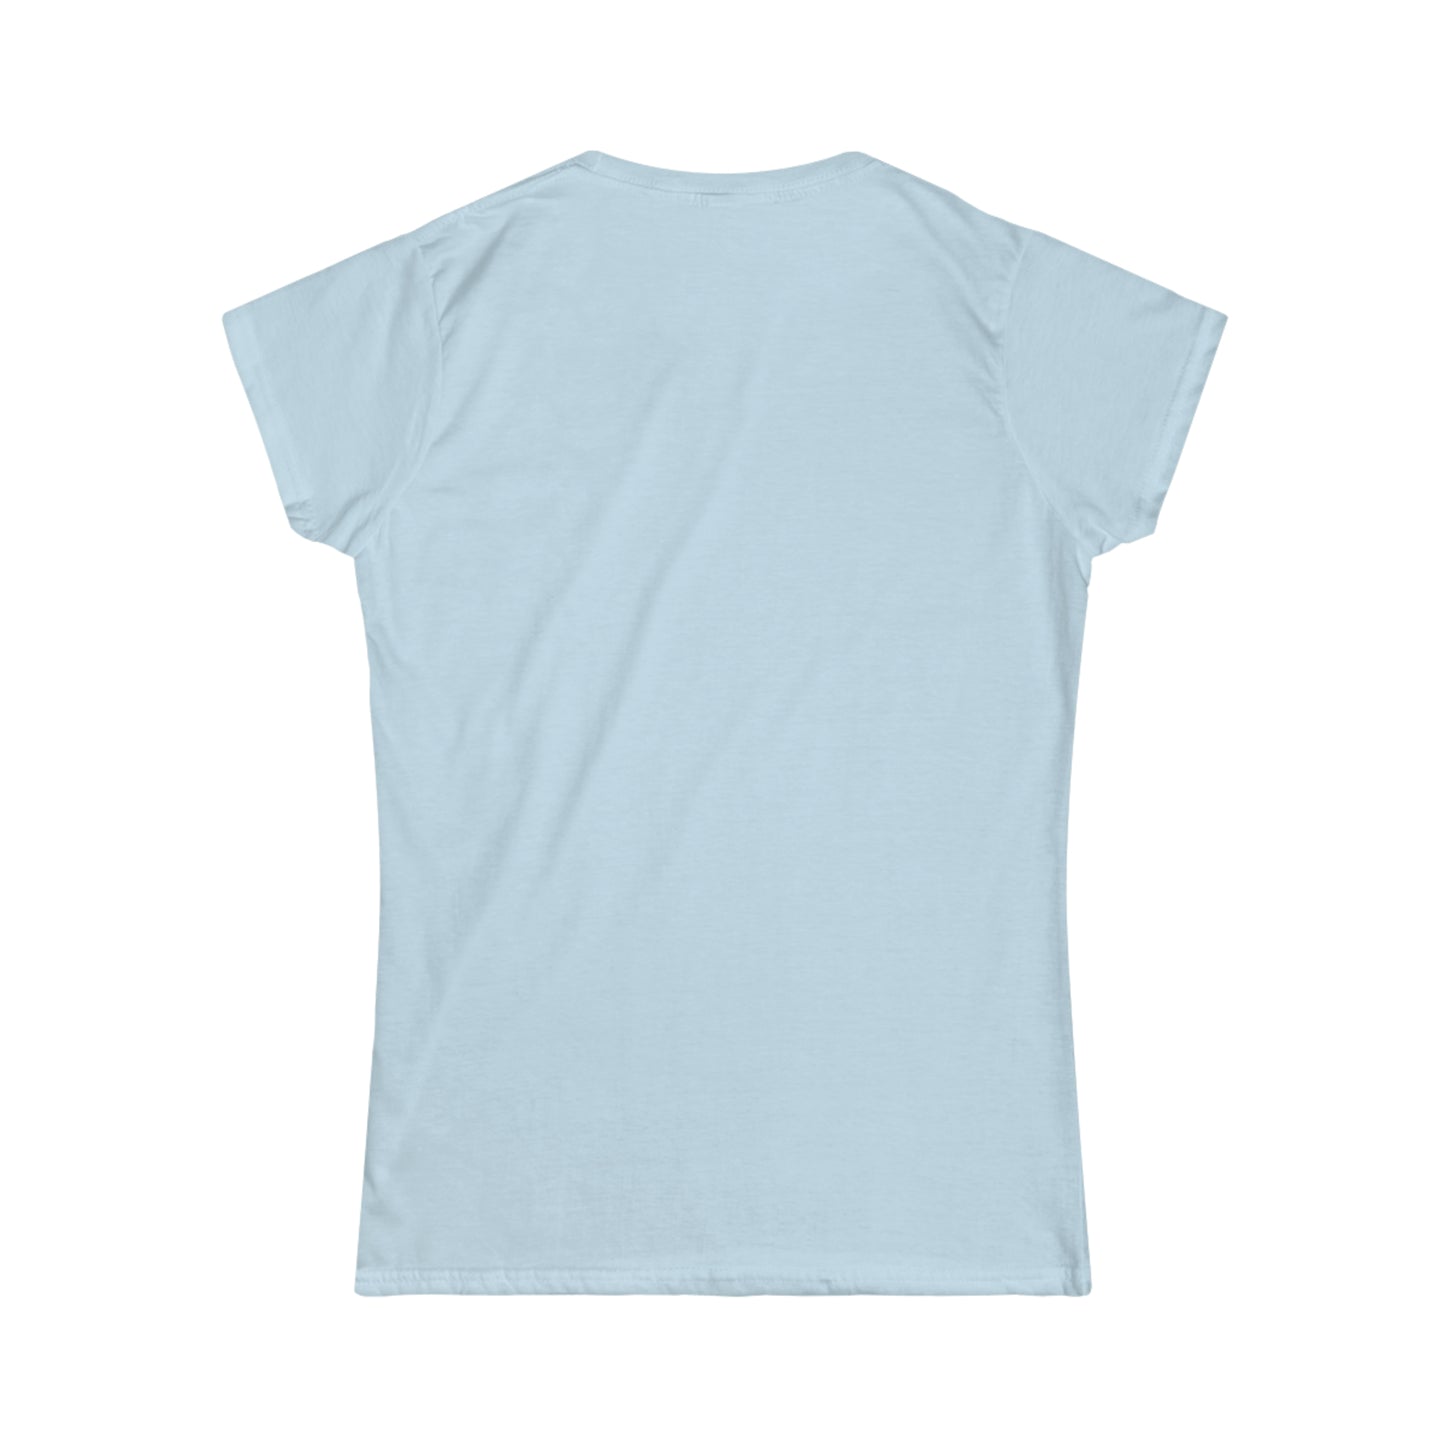 Tested and tried Women's T-shirt